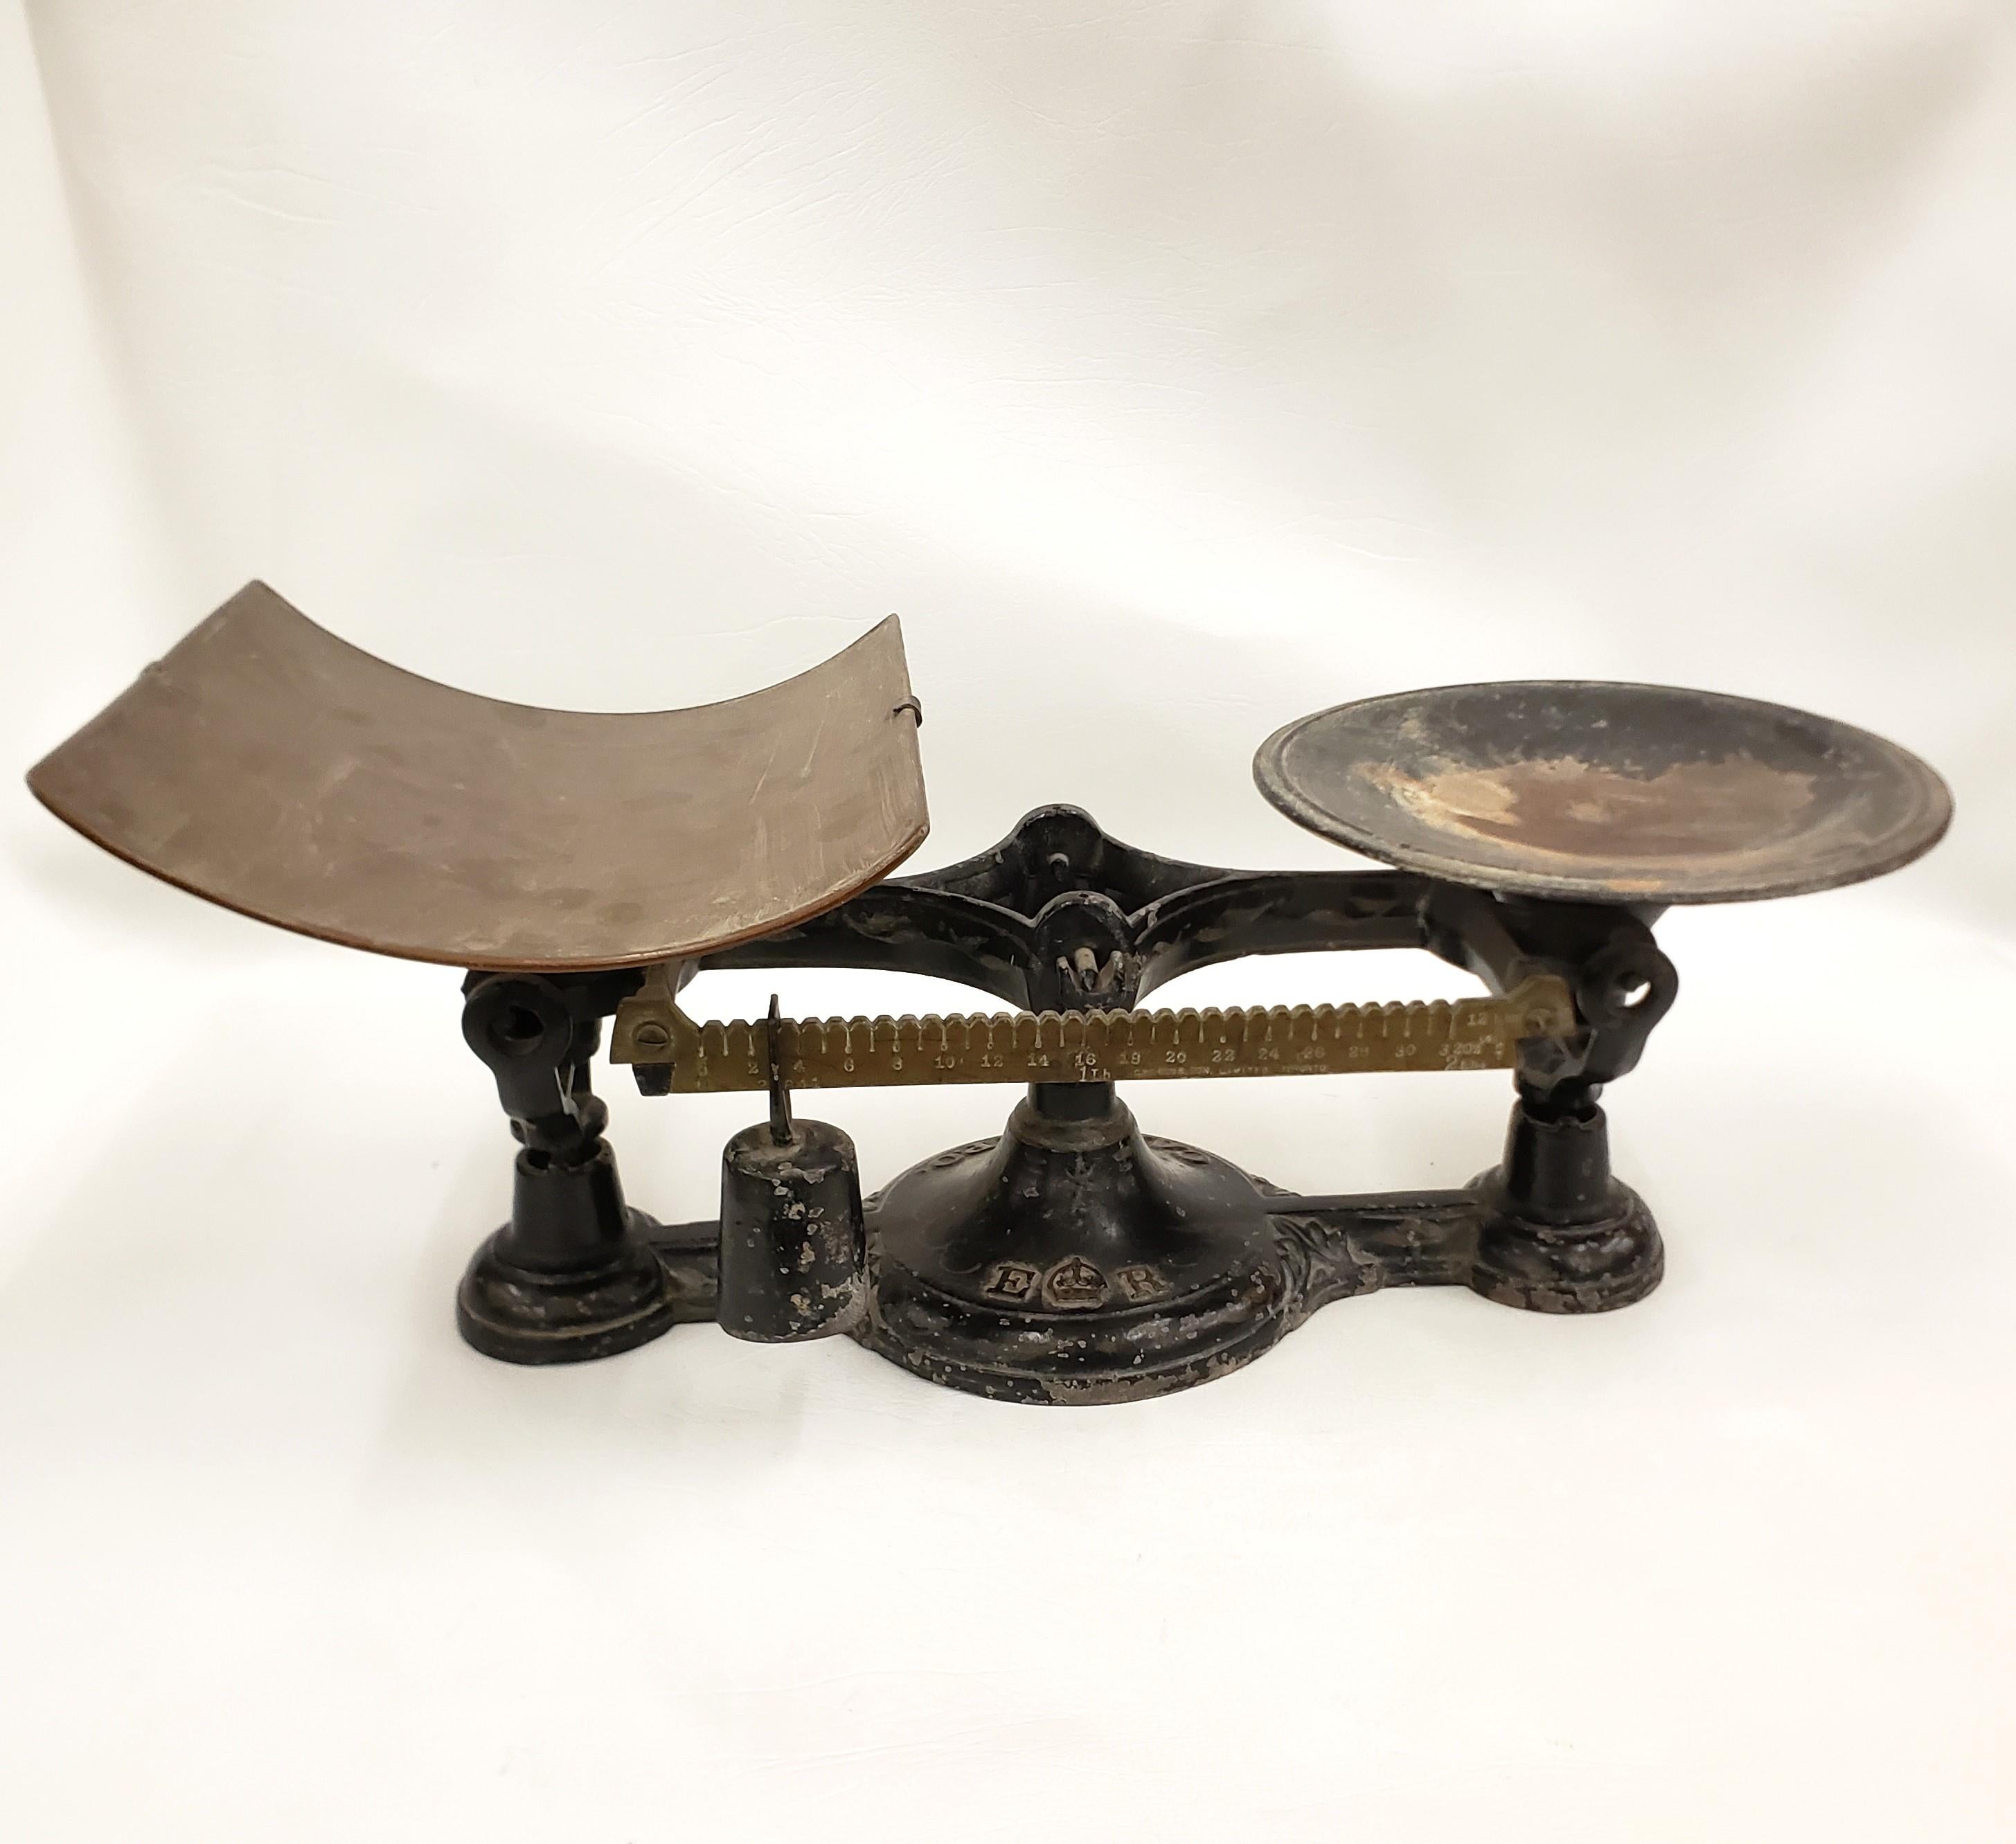 This antique postal scale is unsigned, but presumed to have originated from Canada and date to approximately 1952 and done in the Late Victorian style. The scale is composed of cast metal with a brass pan and slide scale. The base has been